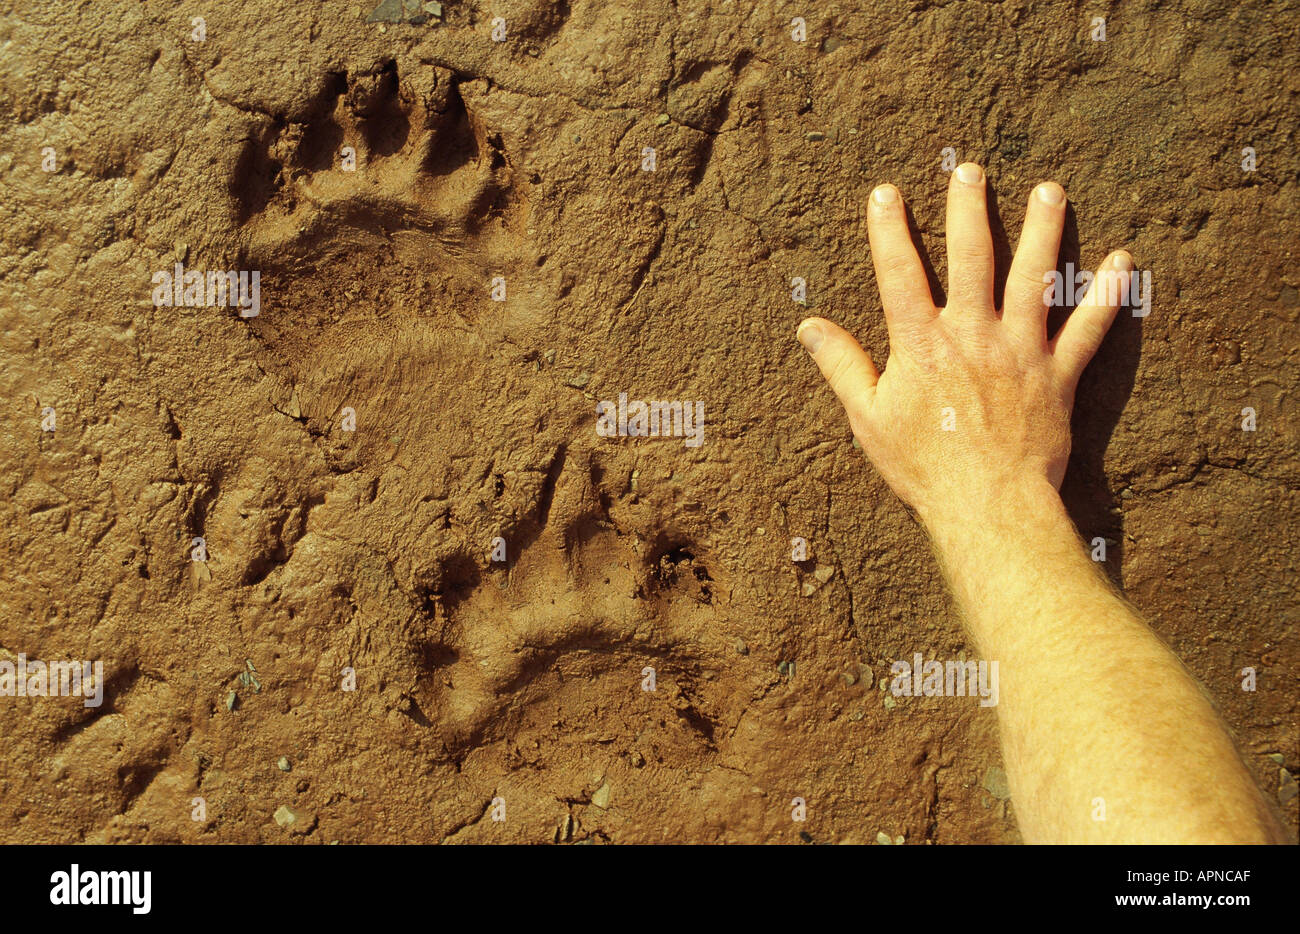 trackway of an polar bear (Ursus maritimus), with hand for scale, Norway, Spitsbergen, Andre Land, Jul 00. Stock Photo